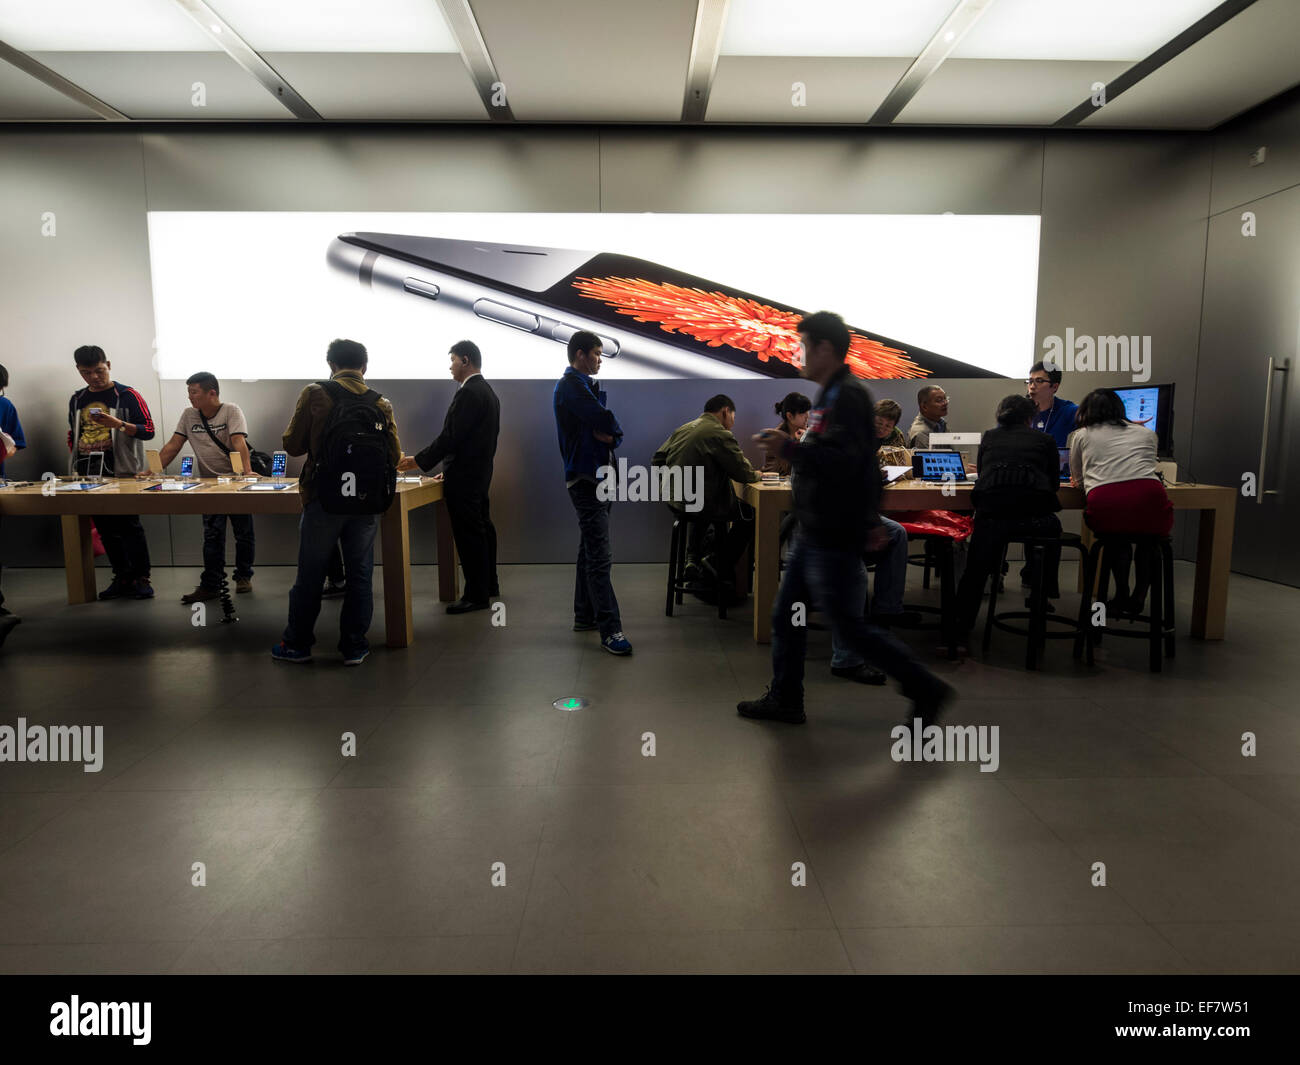 Costumers browsing Apple products at the Apple store located on Nanjing Road in Shanghai, China Stock Photo